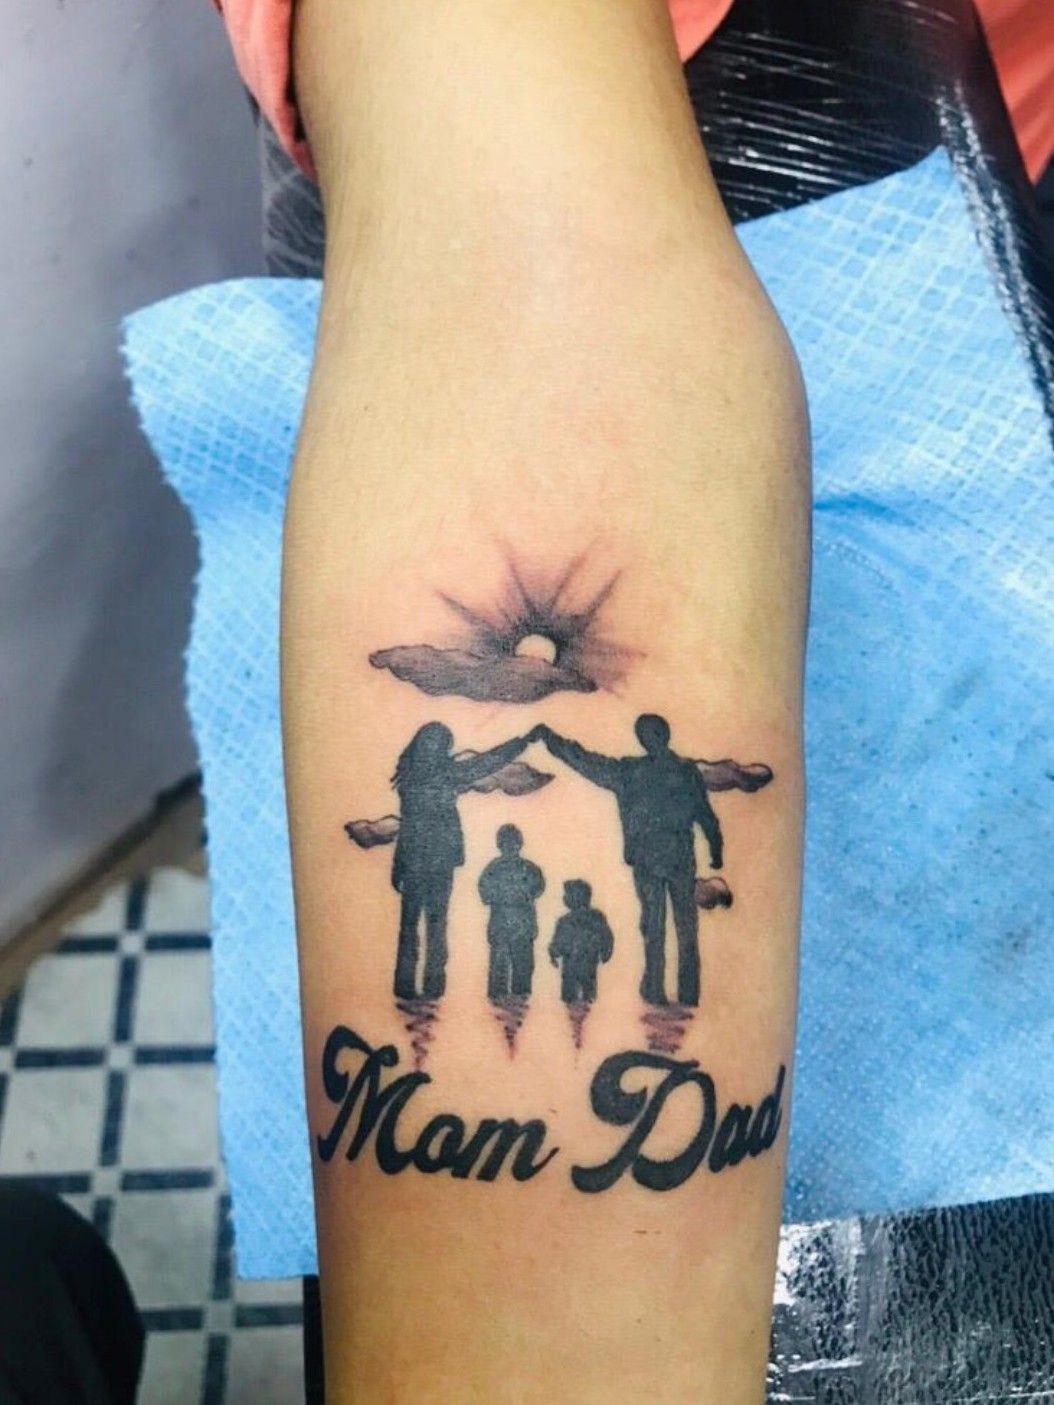 Expressing the Bond Between Father and Son Through Meaningful Simple Tattoos   Impeccable Nest